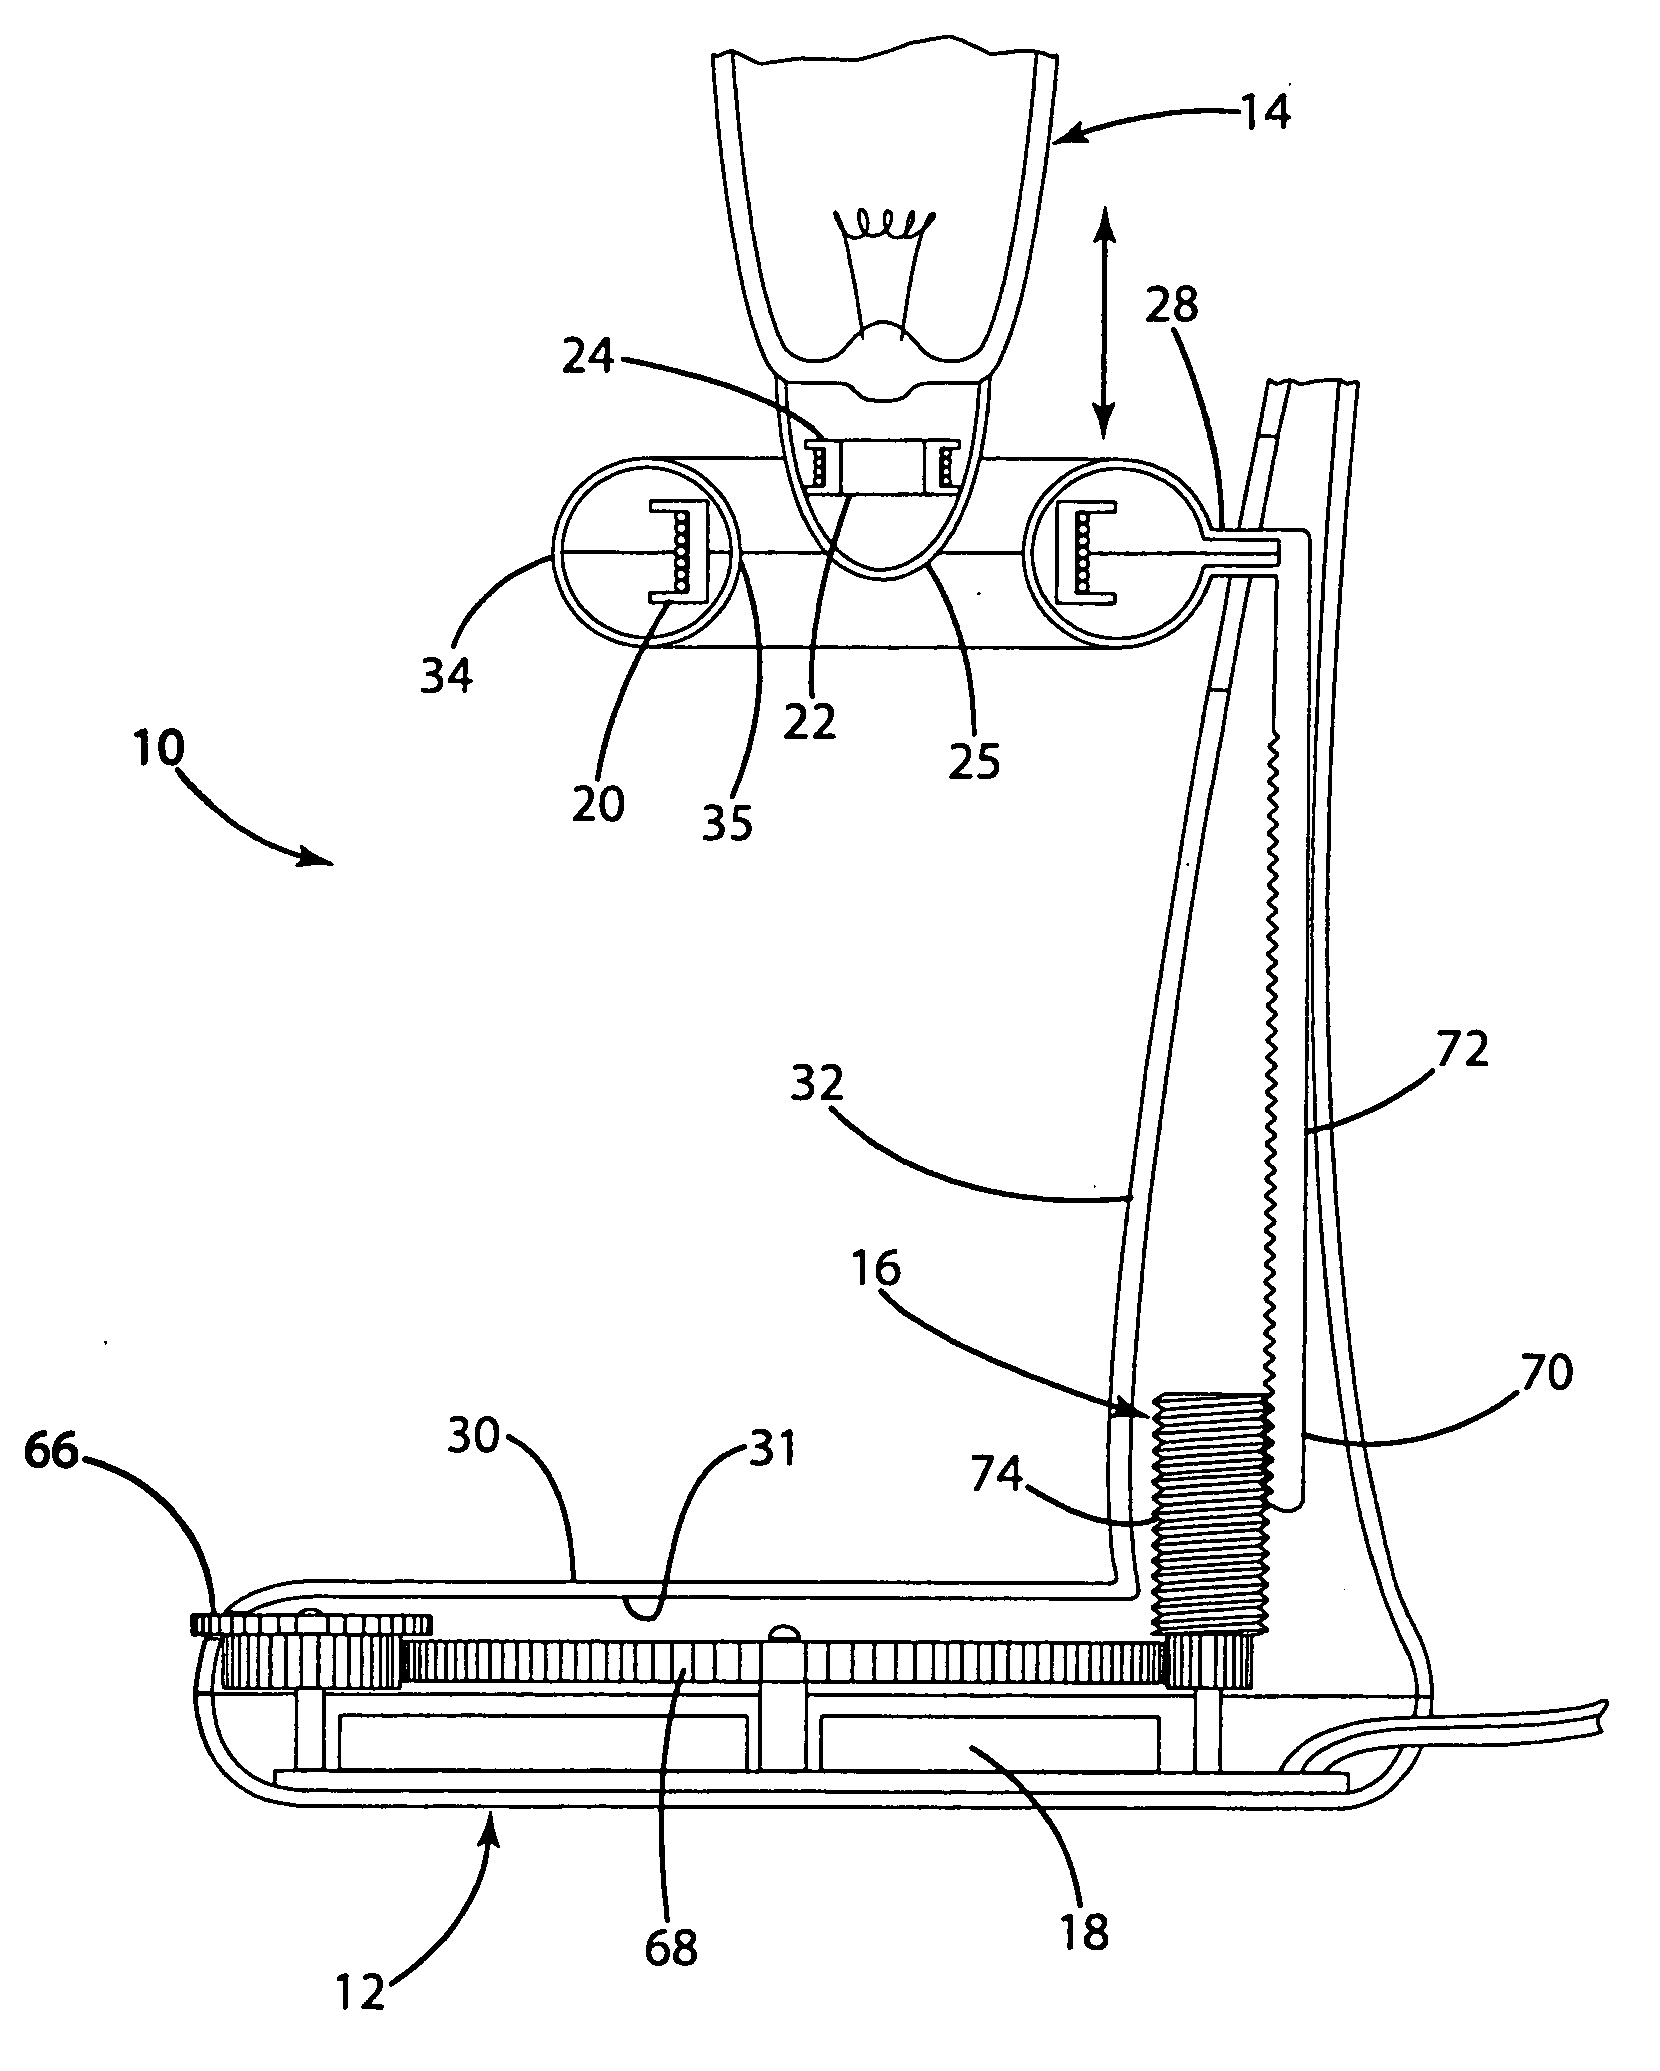 Inductively powered apparatus